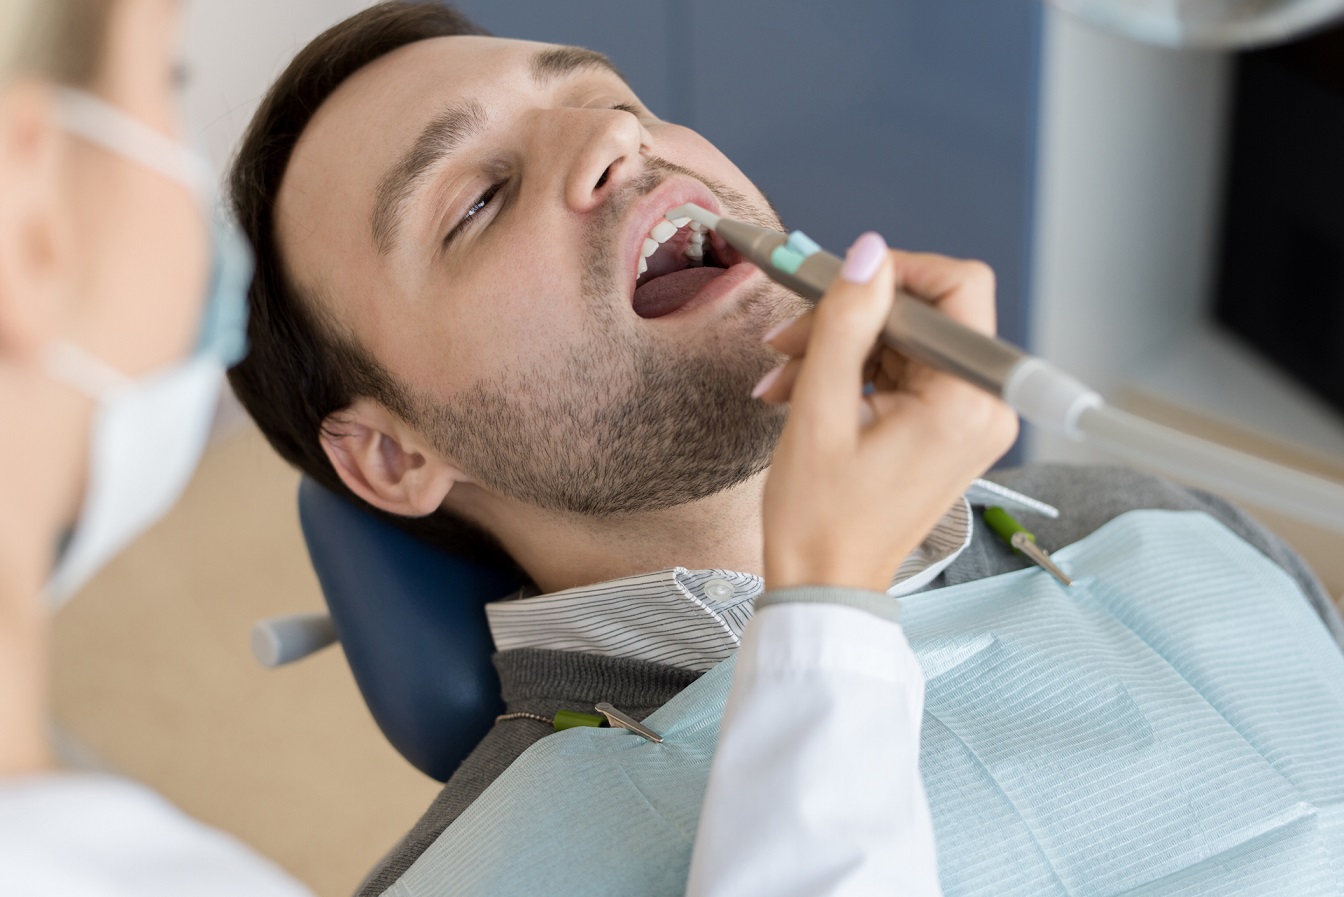 How Long Can You Leave a Cavity Untreated